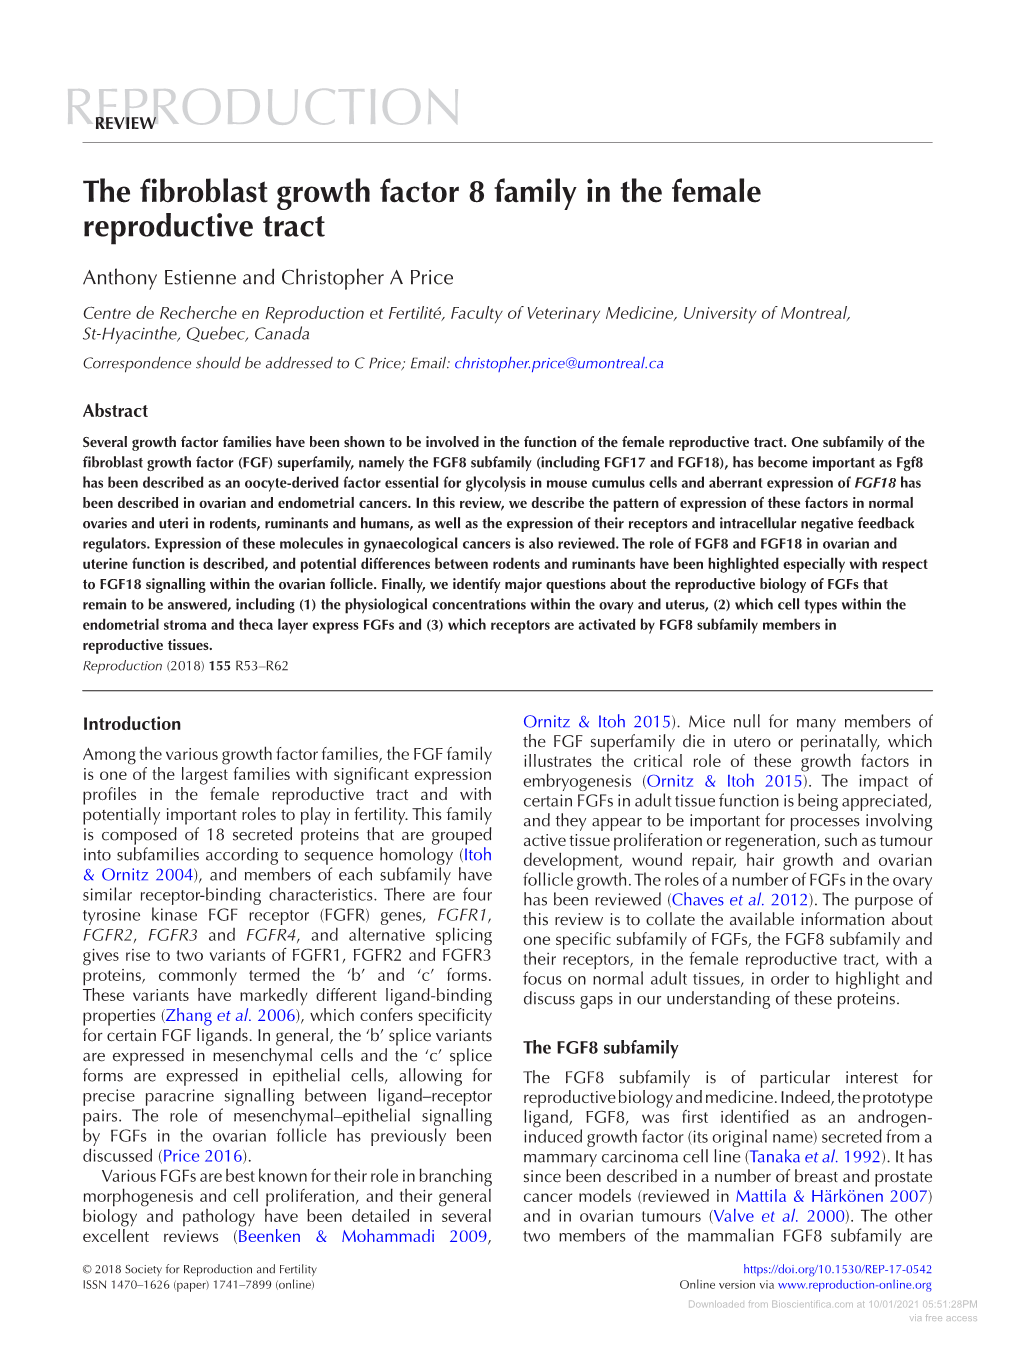 The Fibroblast Growth Factor 8 Family in the Female Reproductive Tract